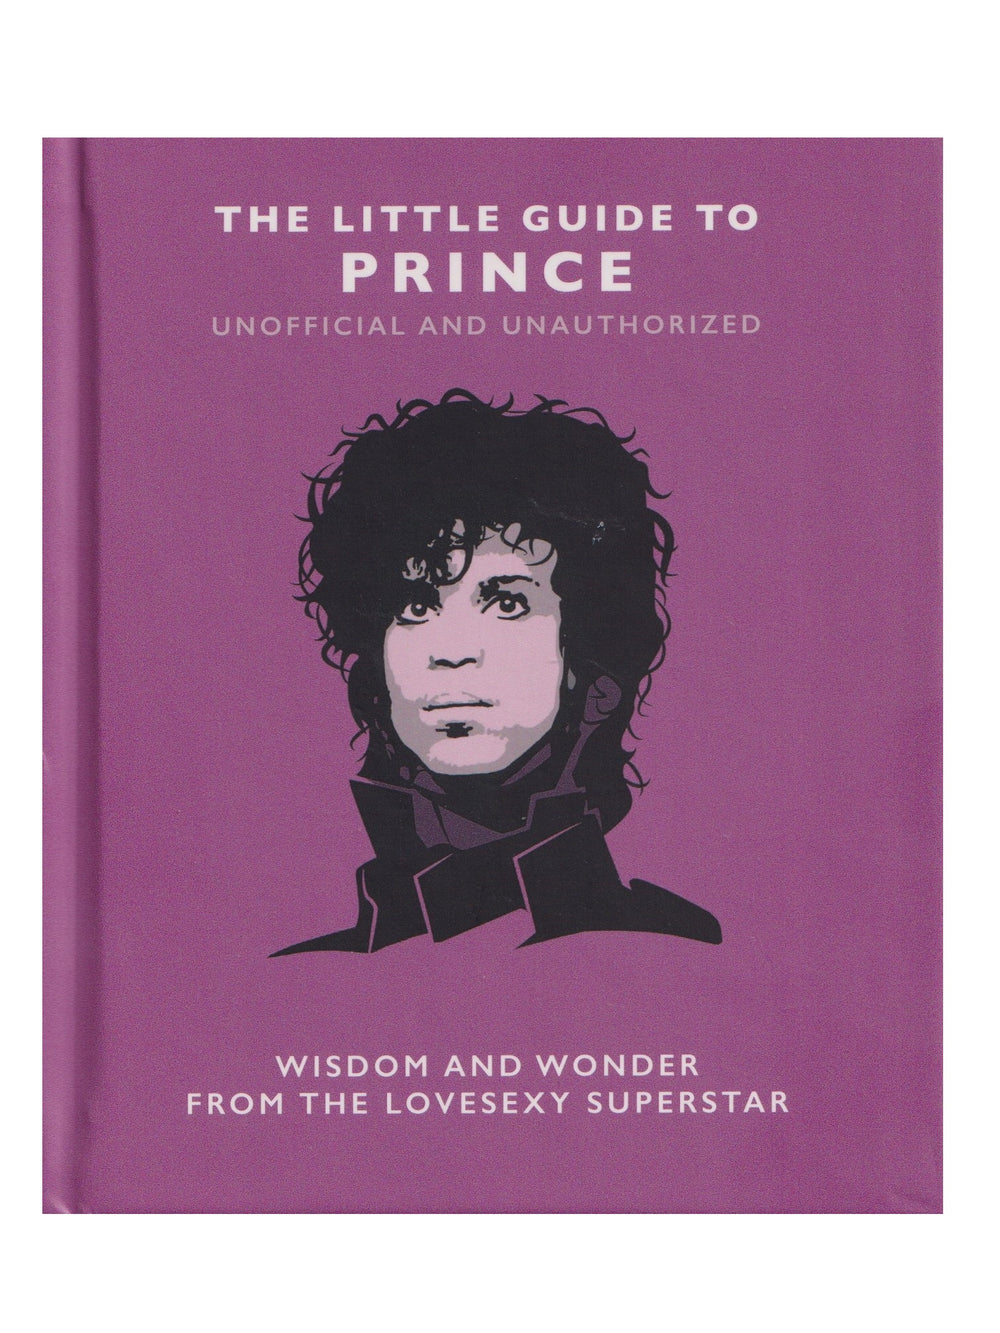 Prince The Little Guide To Quotations Hardbacked Book